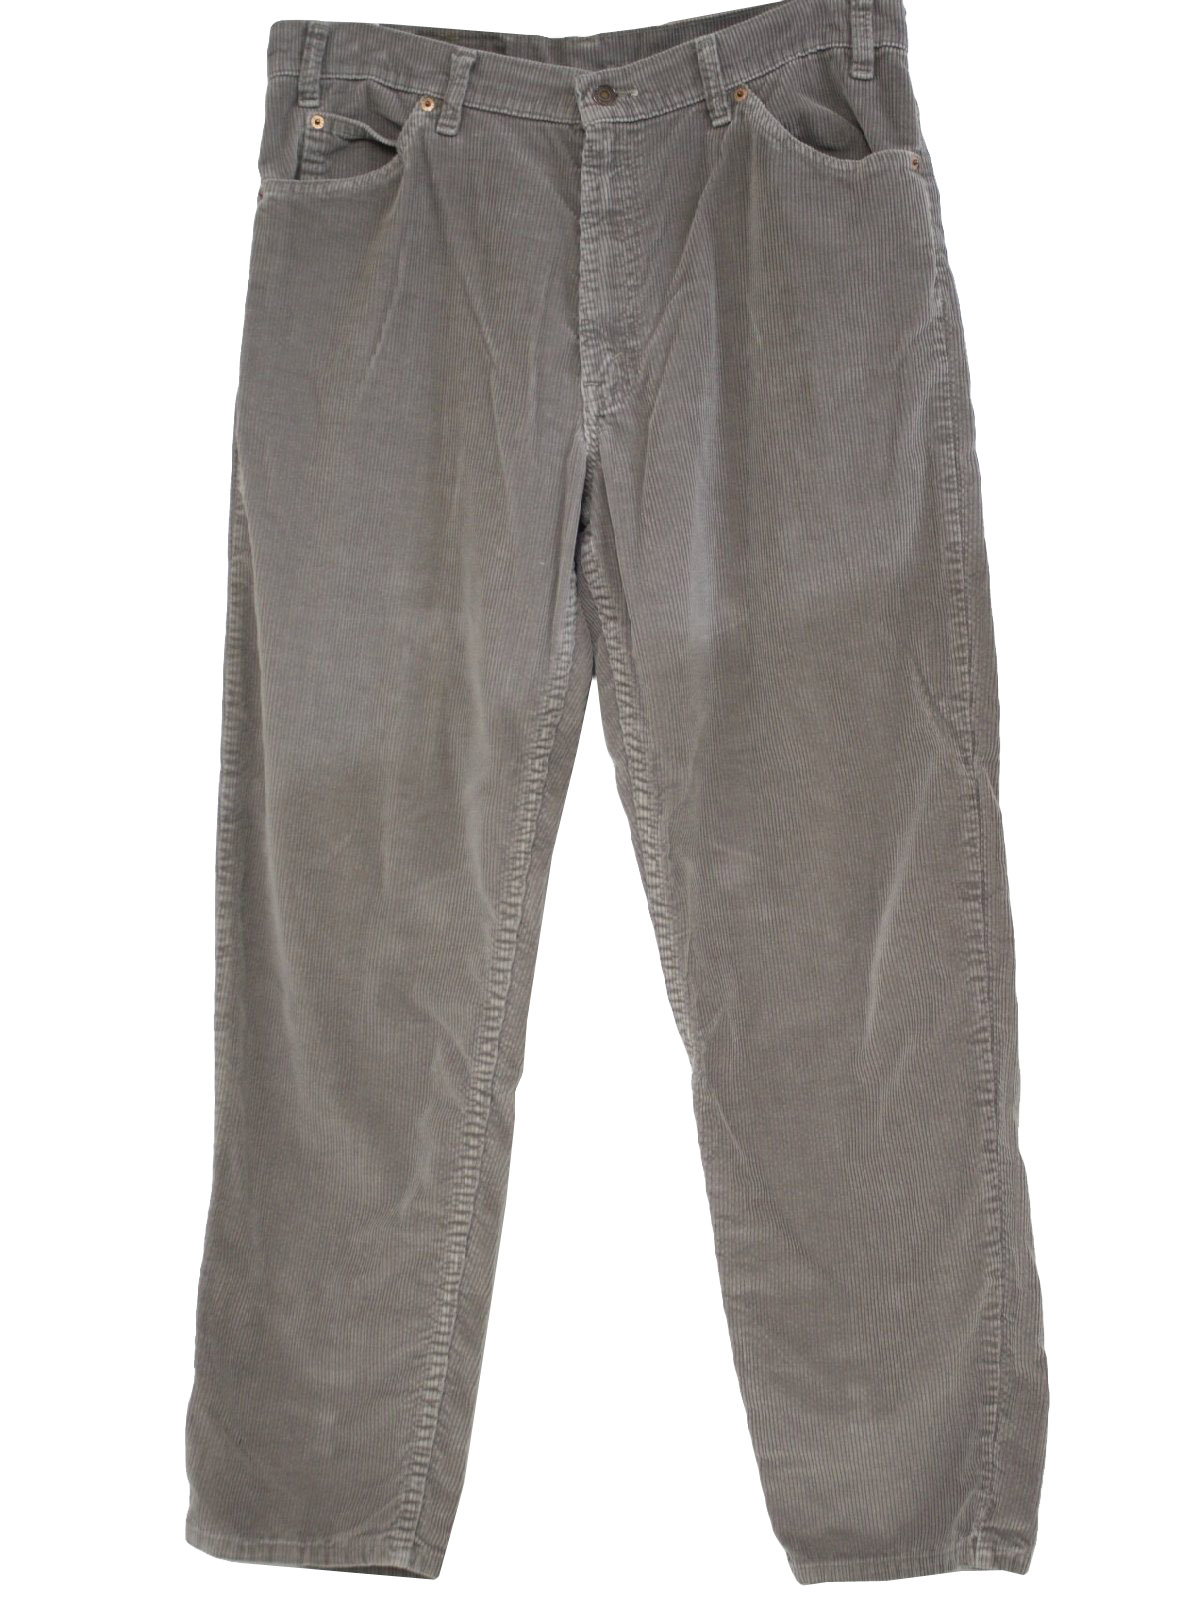 Nineties Vintage Pants: 90s -Levis- Mens light gray cotton polyester ...